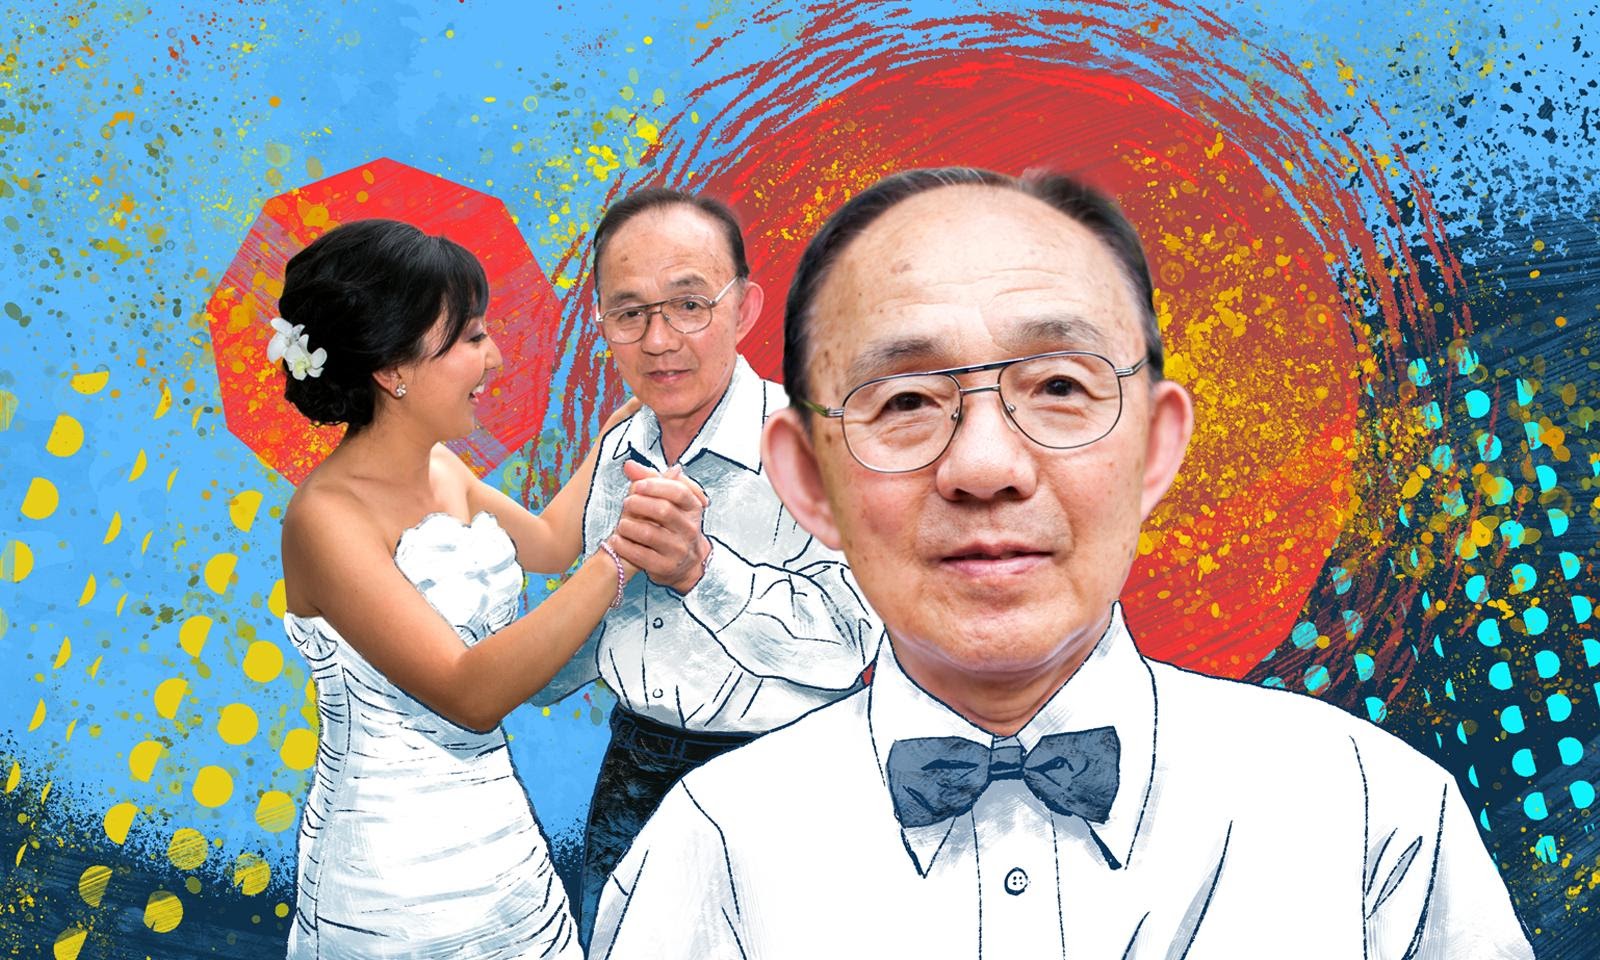 A women wears a wedding dress and smiles while dancing with her father. Colorful illustrations are behind them.